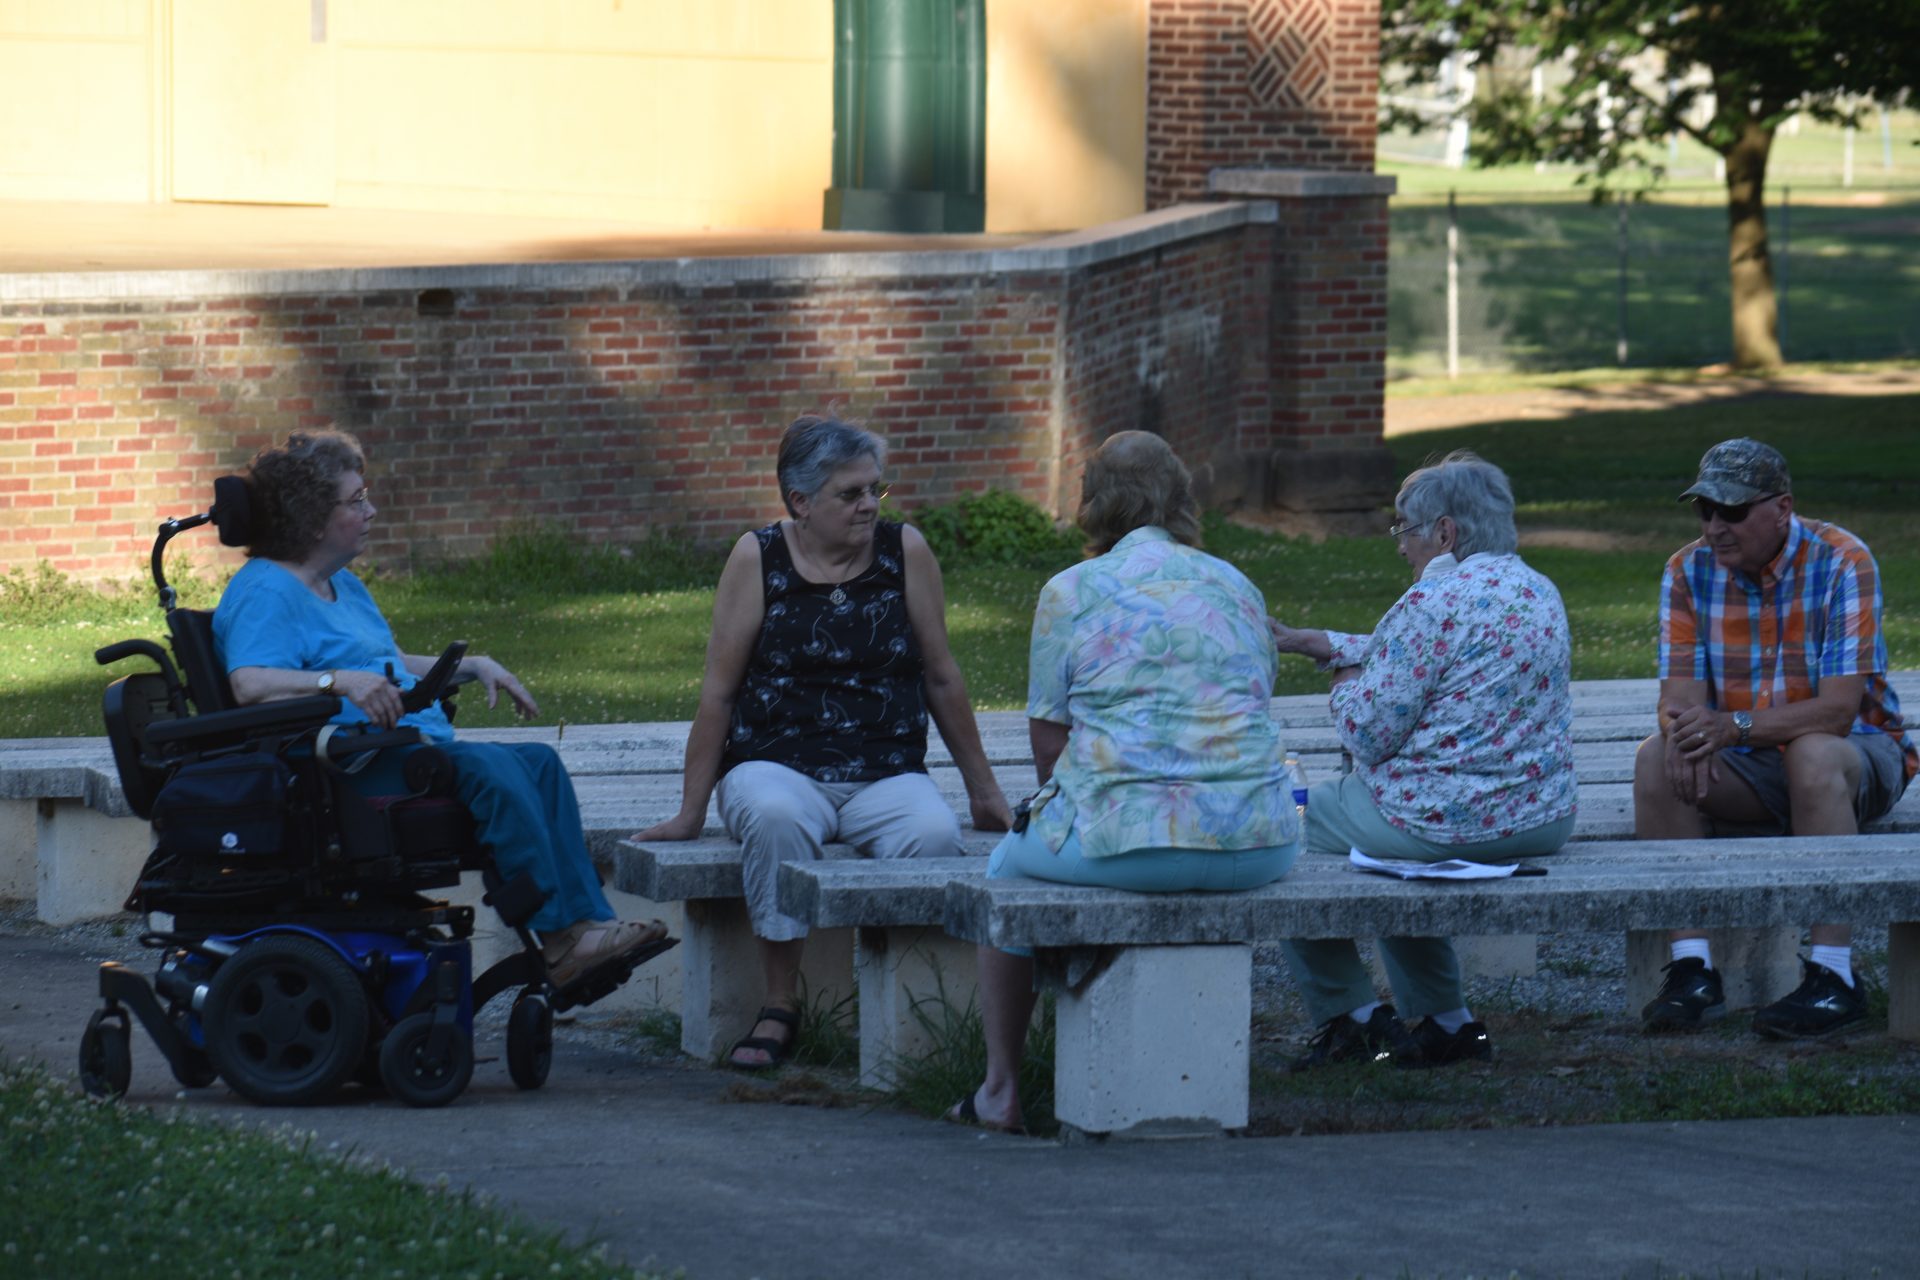 From left: Pat Bole, Nancy Jacobs, Tina Hall, Donna Camp and Rick Jacobs gathered to pray at Brandon Park Friday evening ahead of the National Socialist Movement gathering Saturday.